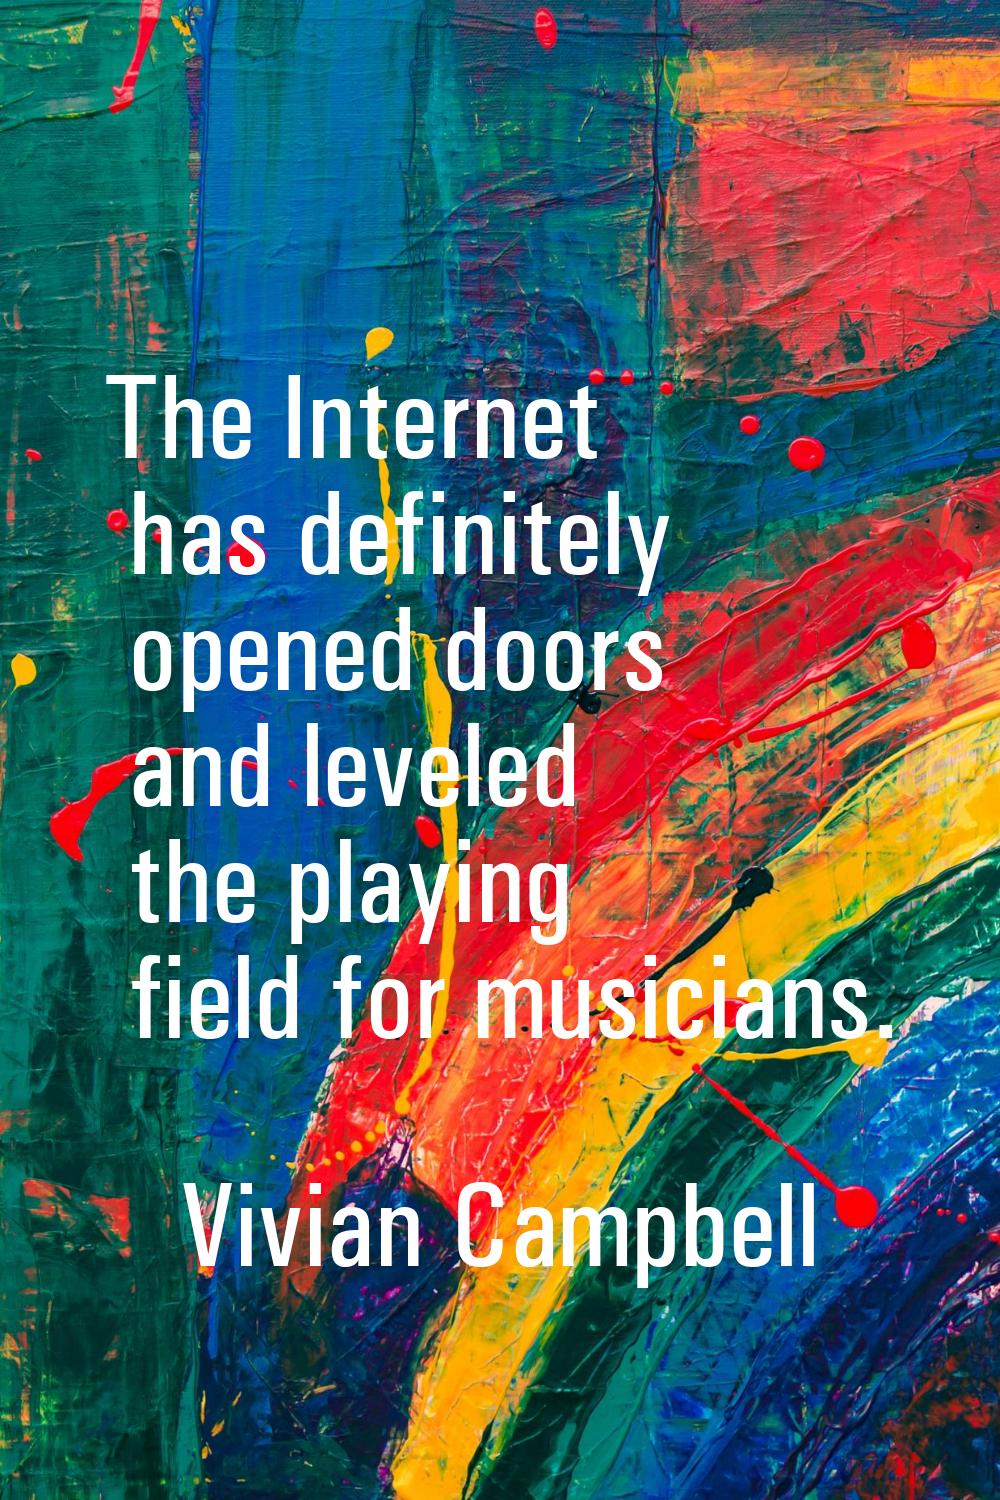 The Internet has definitely opened doors and leveled the playing field for musicians.